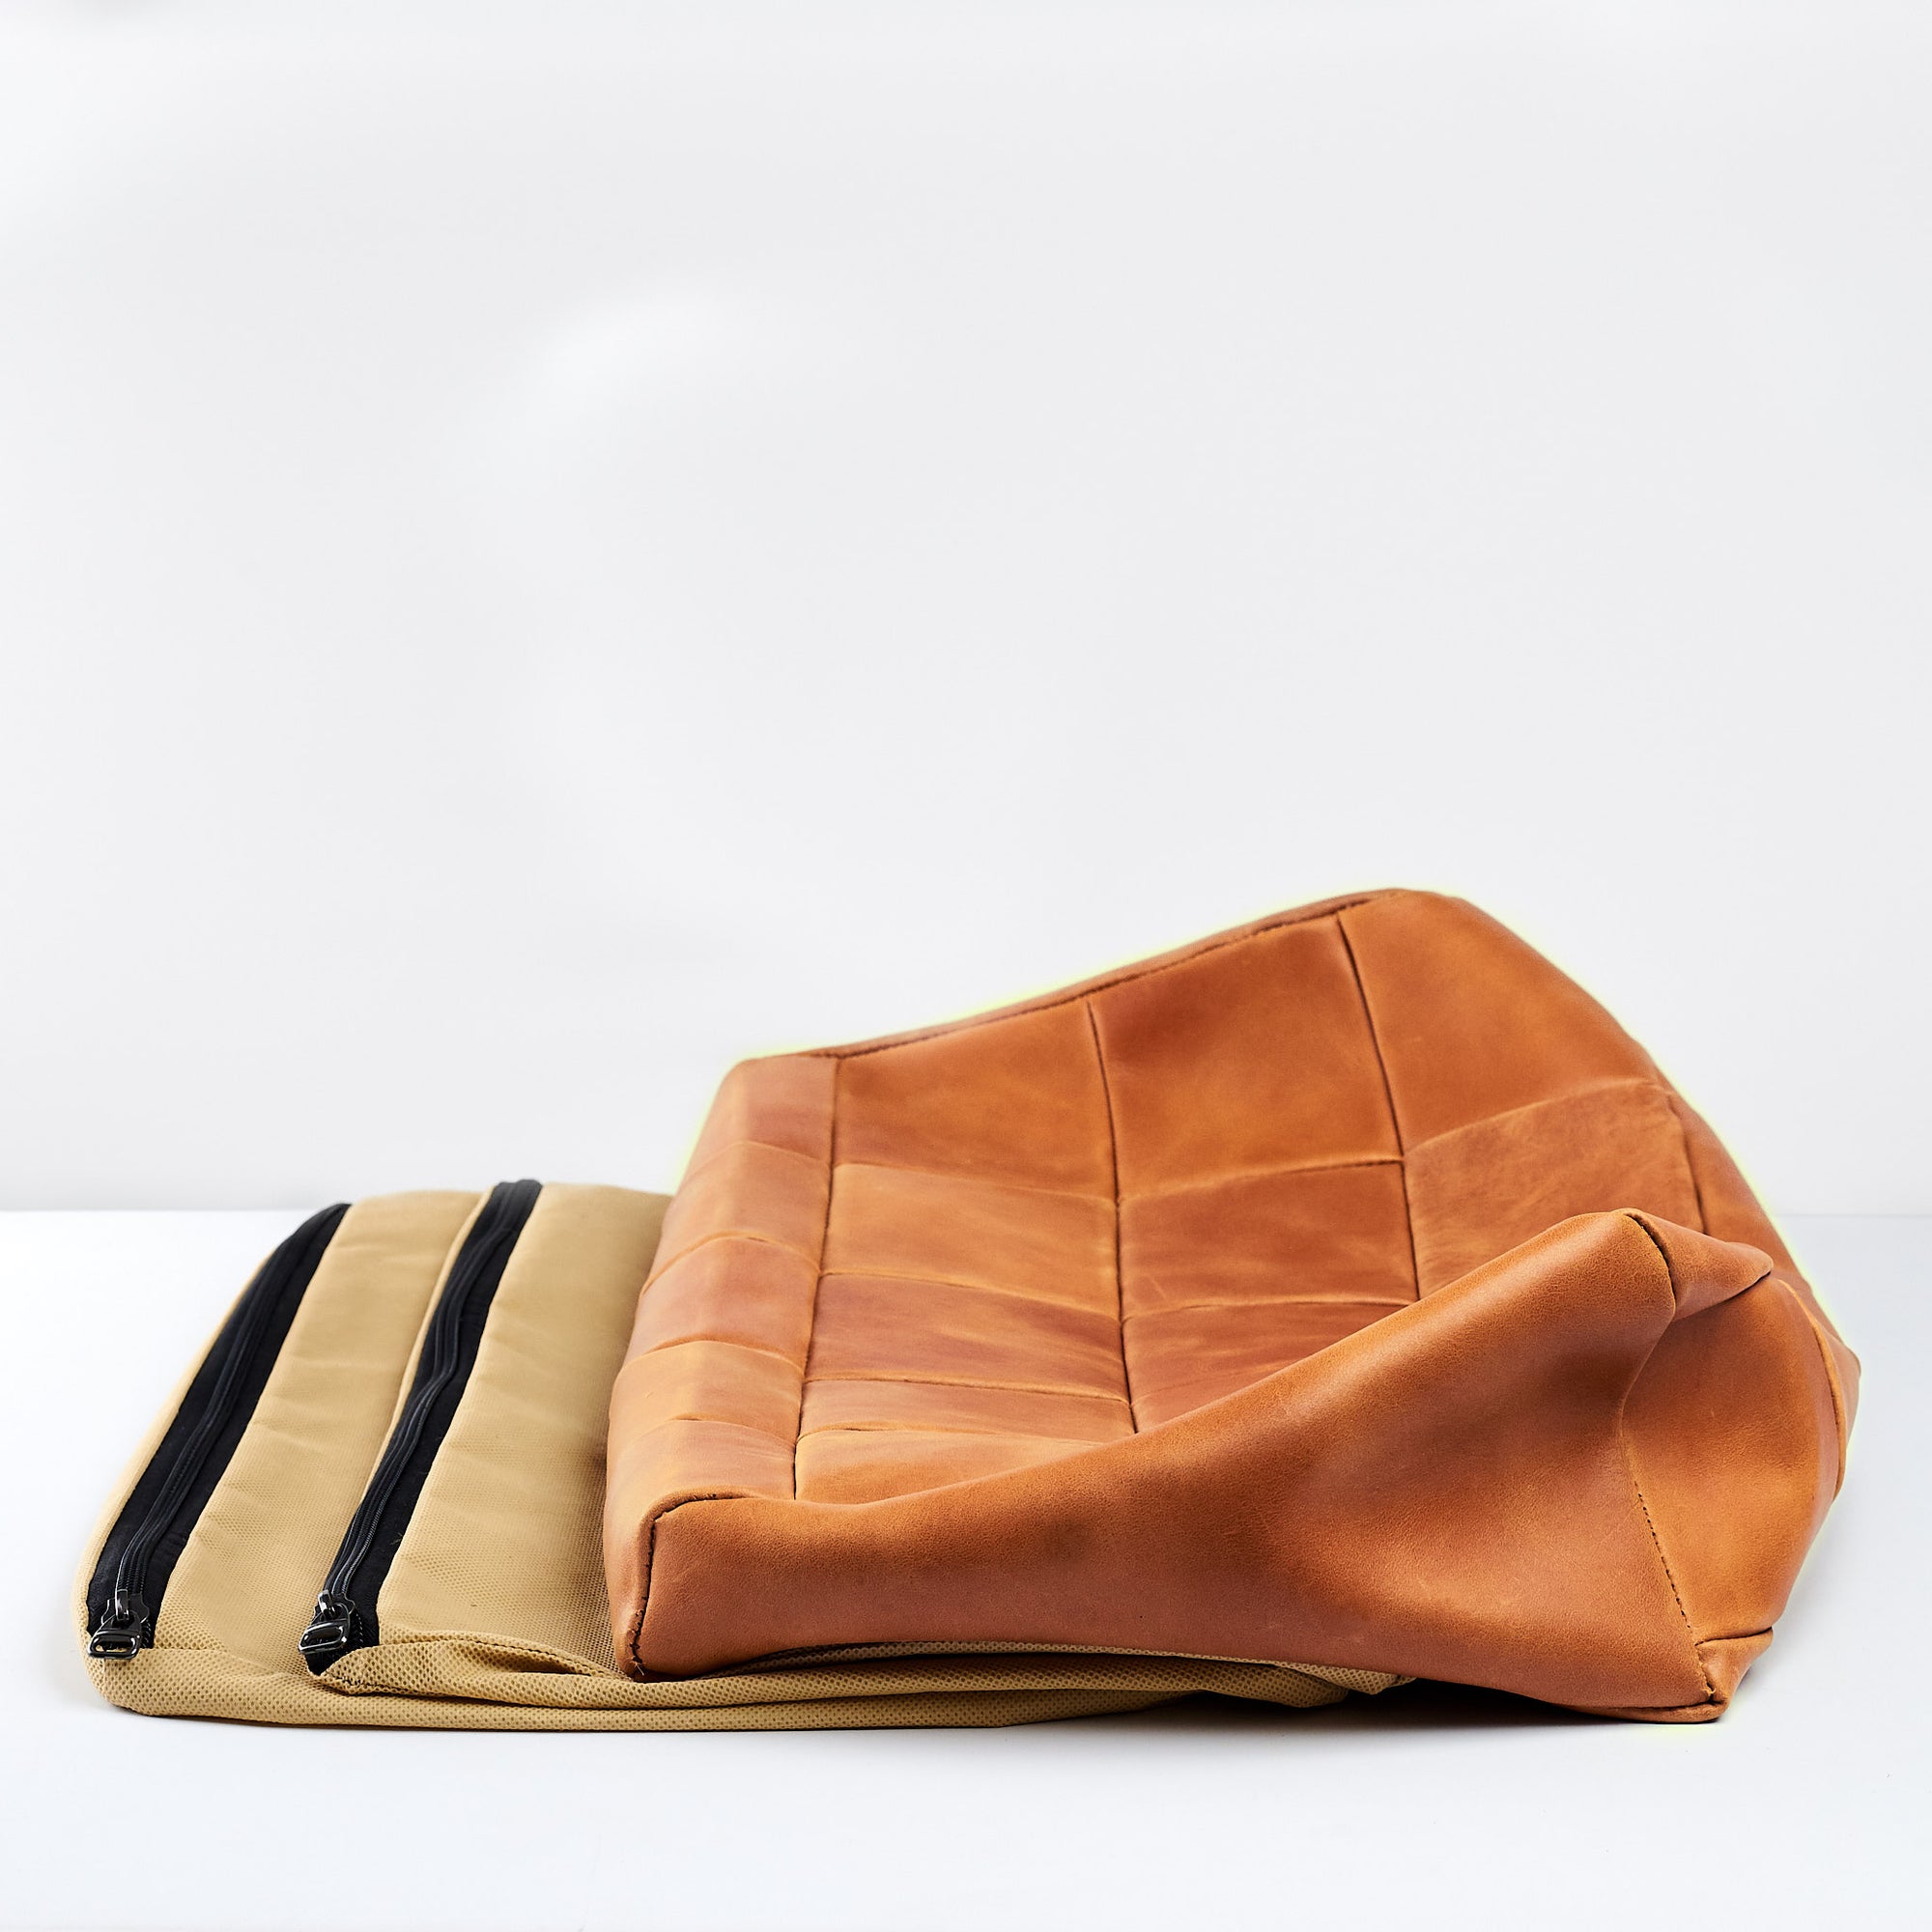 Inner Bags and Cover. Ergonomic under desk footrest cover in distressed cognac by Capra Leather